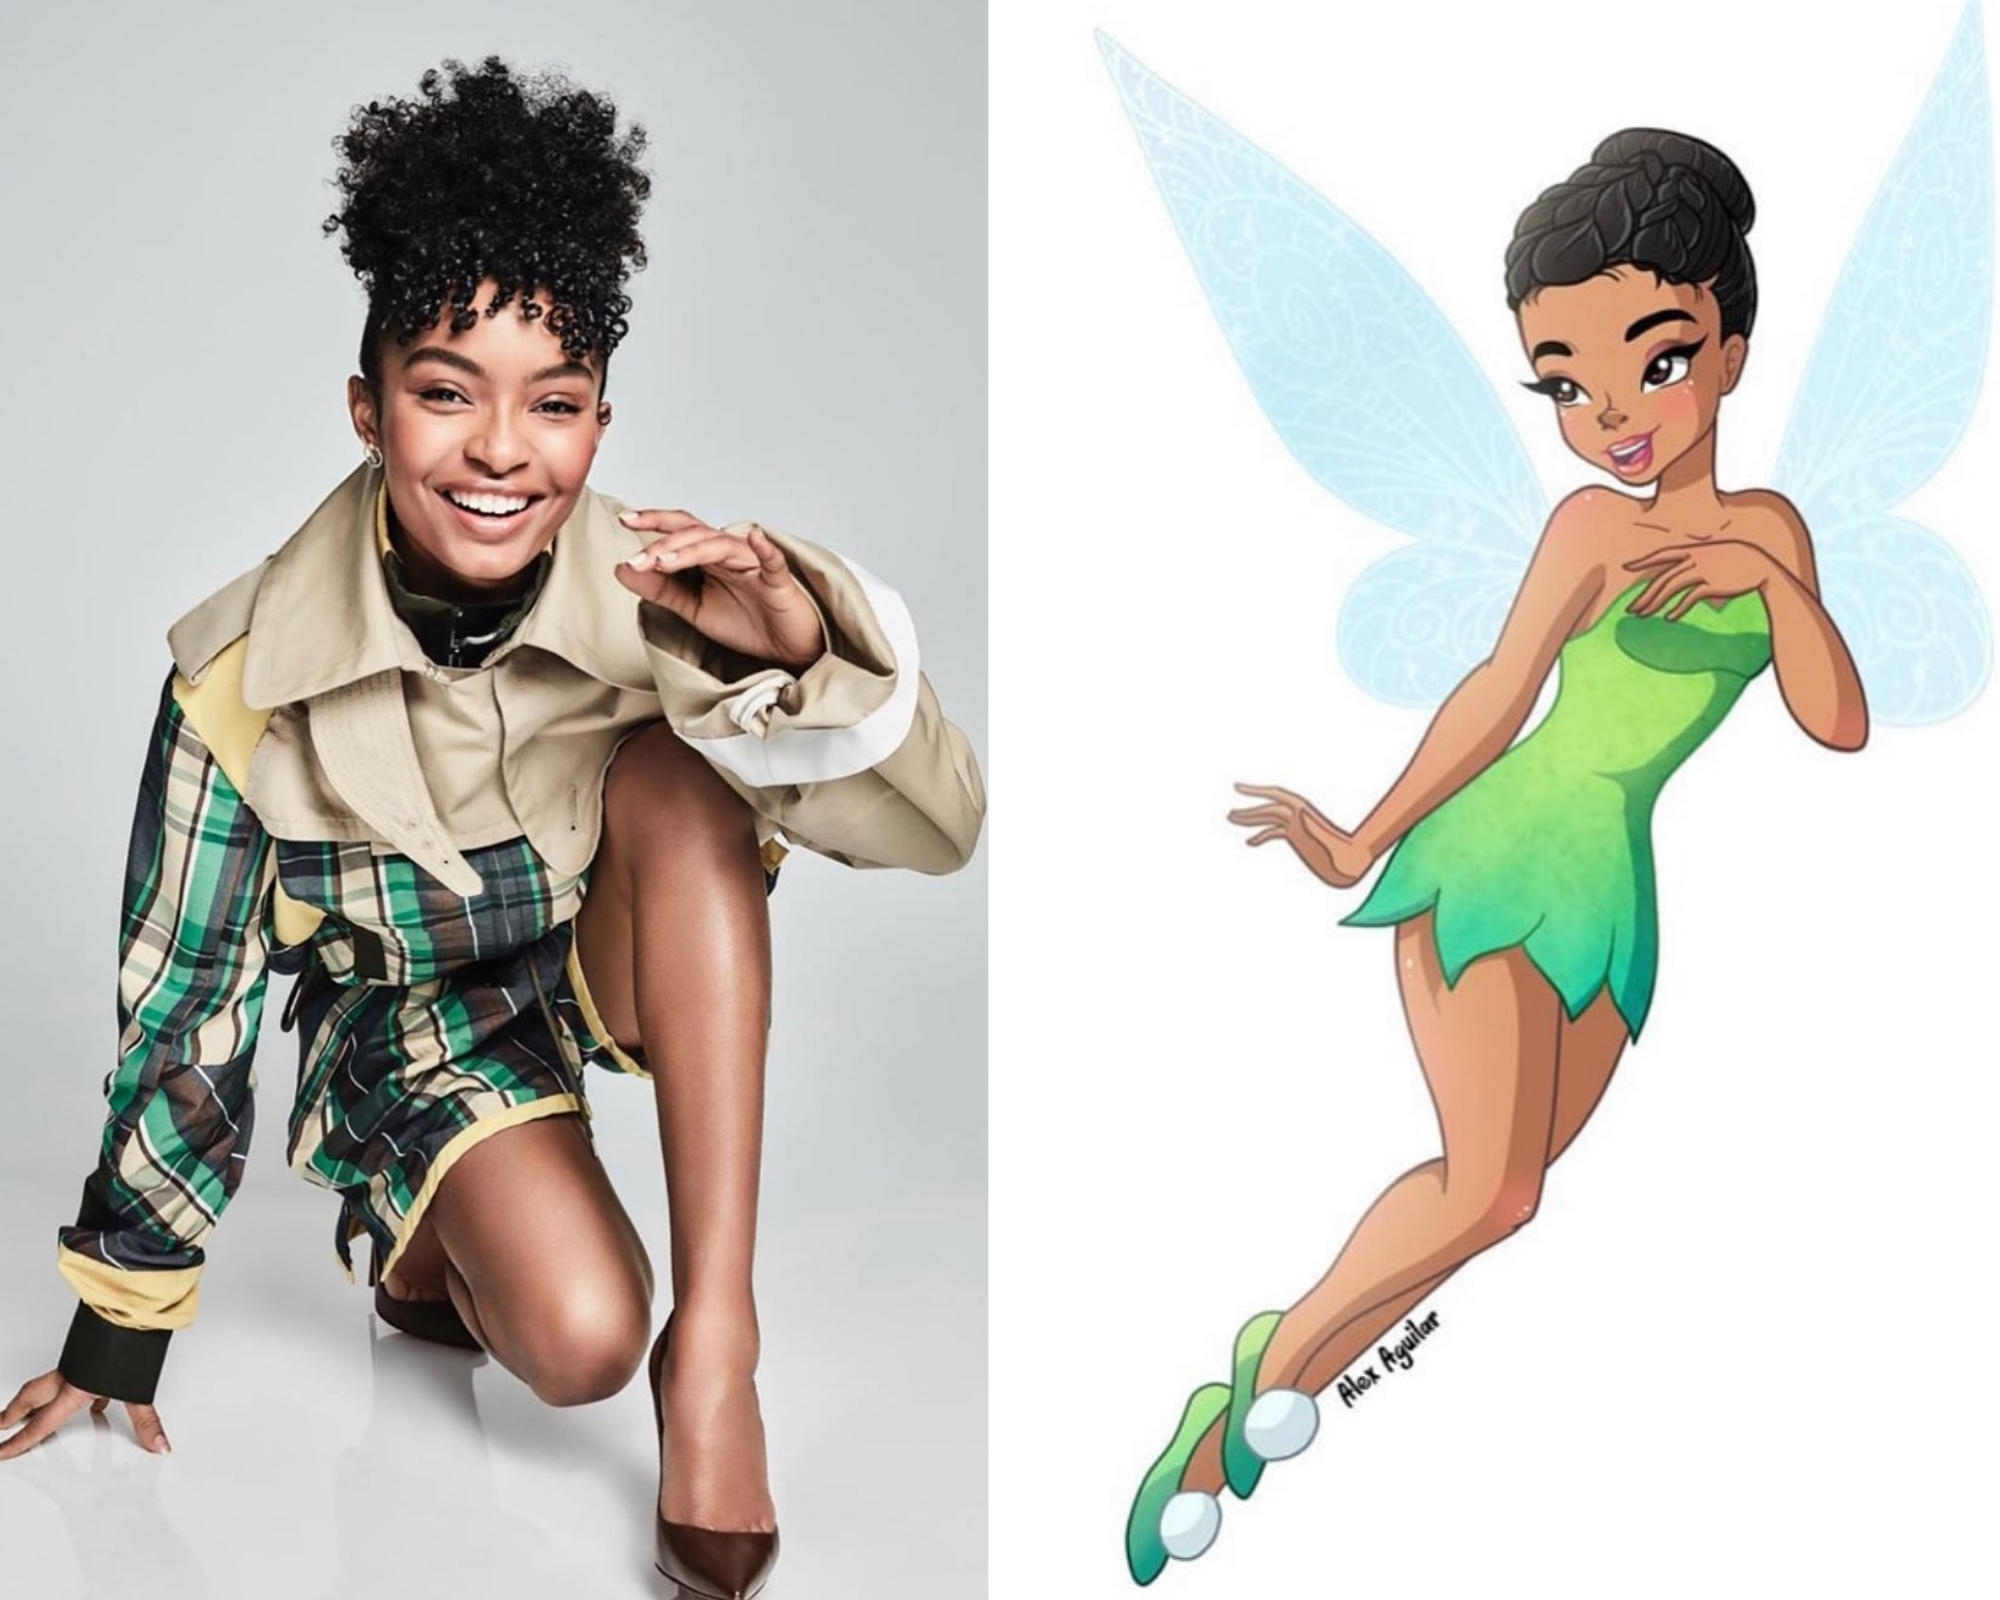 Yara Shahidi on Playing Tinker Bell in Disney's Live-Action Peter